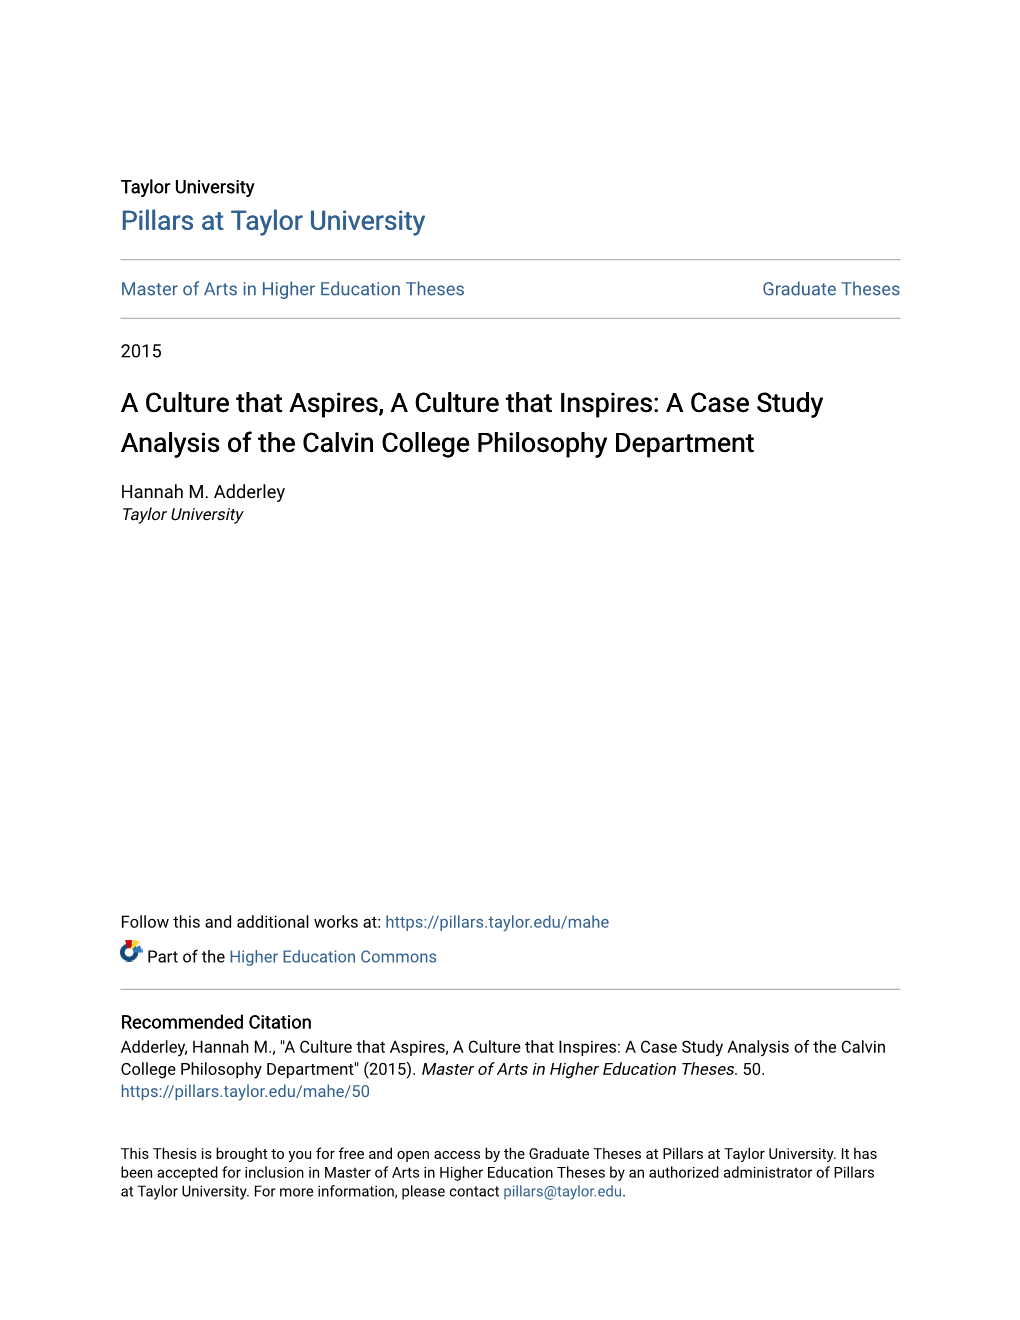 A Culture That Aspires, a Culture That Inspires: a Case Study Analysis of the Calvin College Philosophy Department